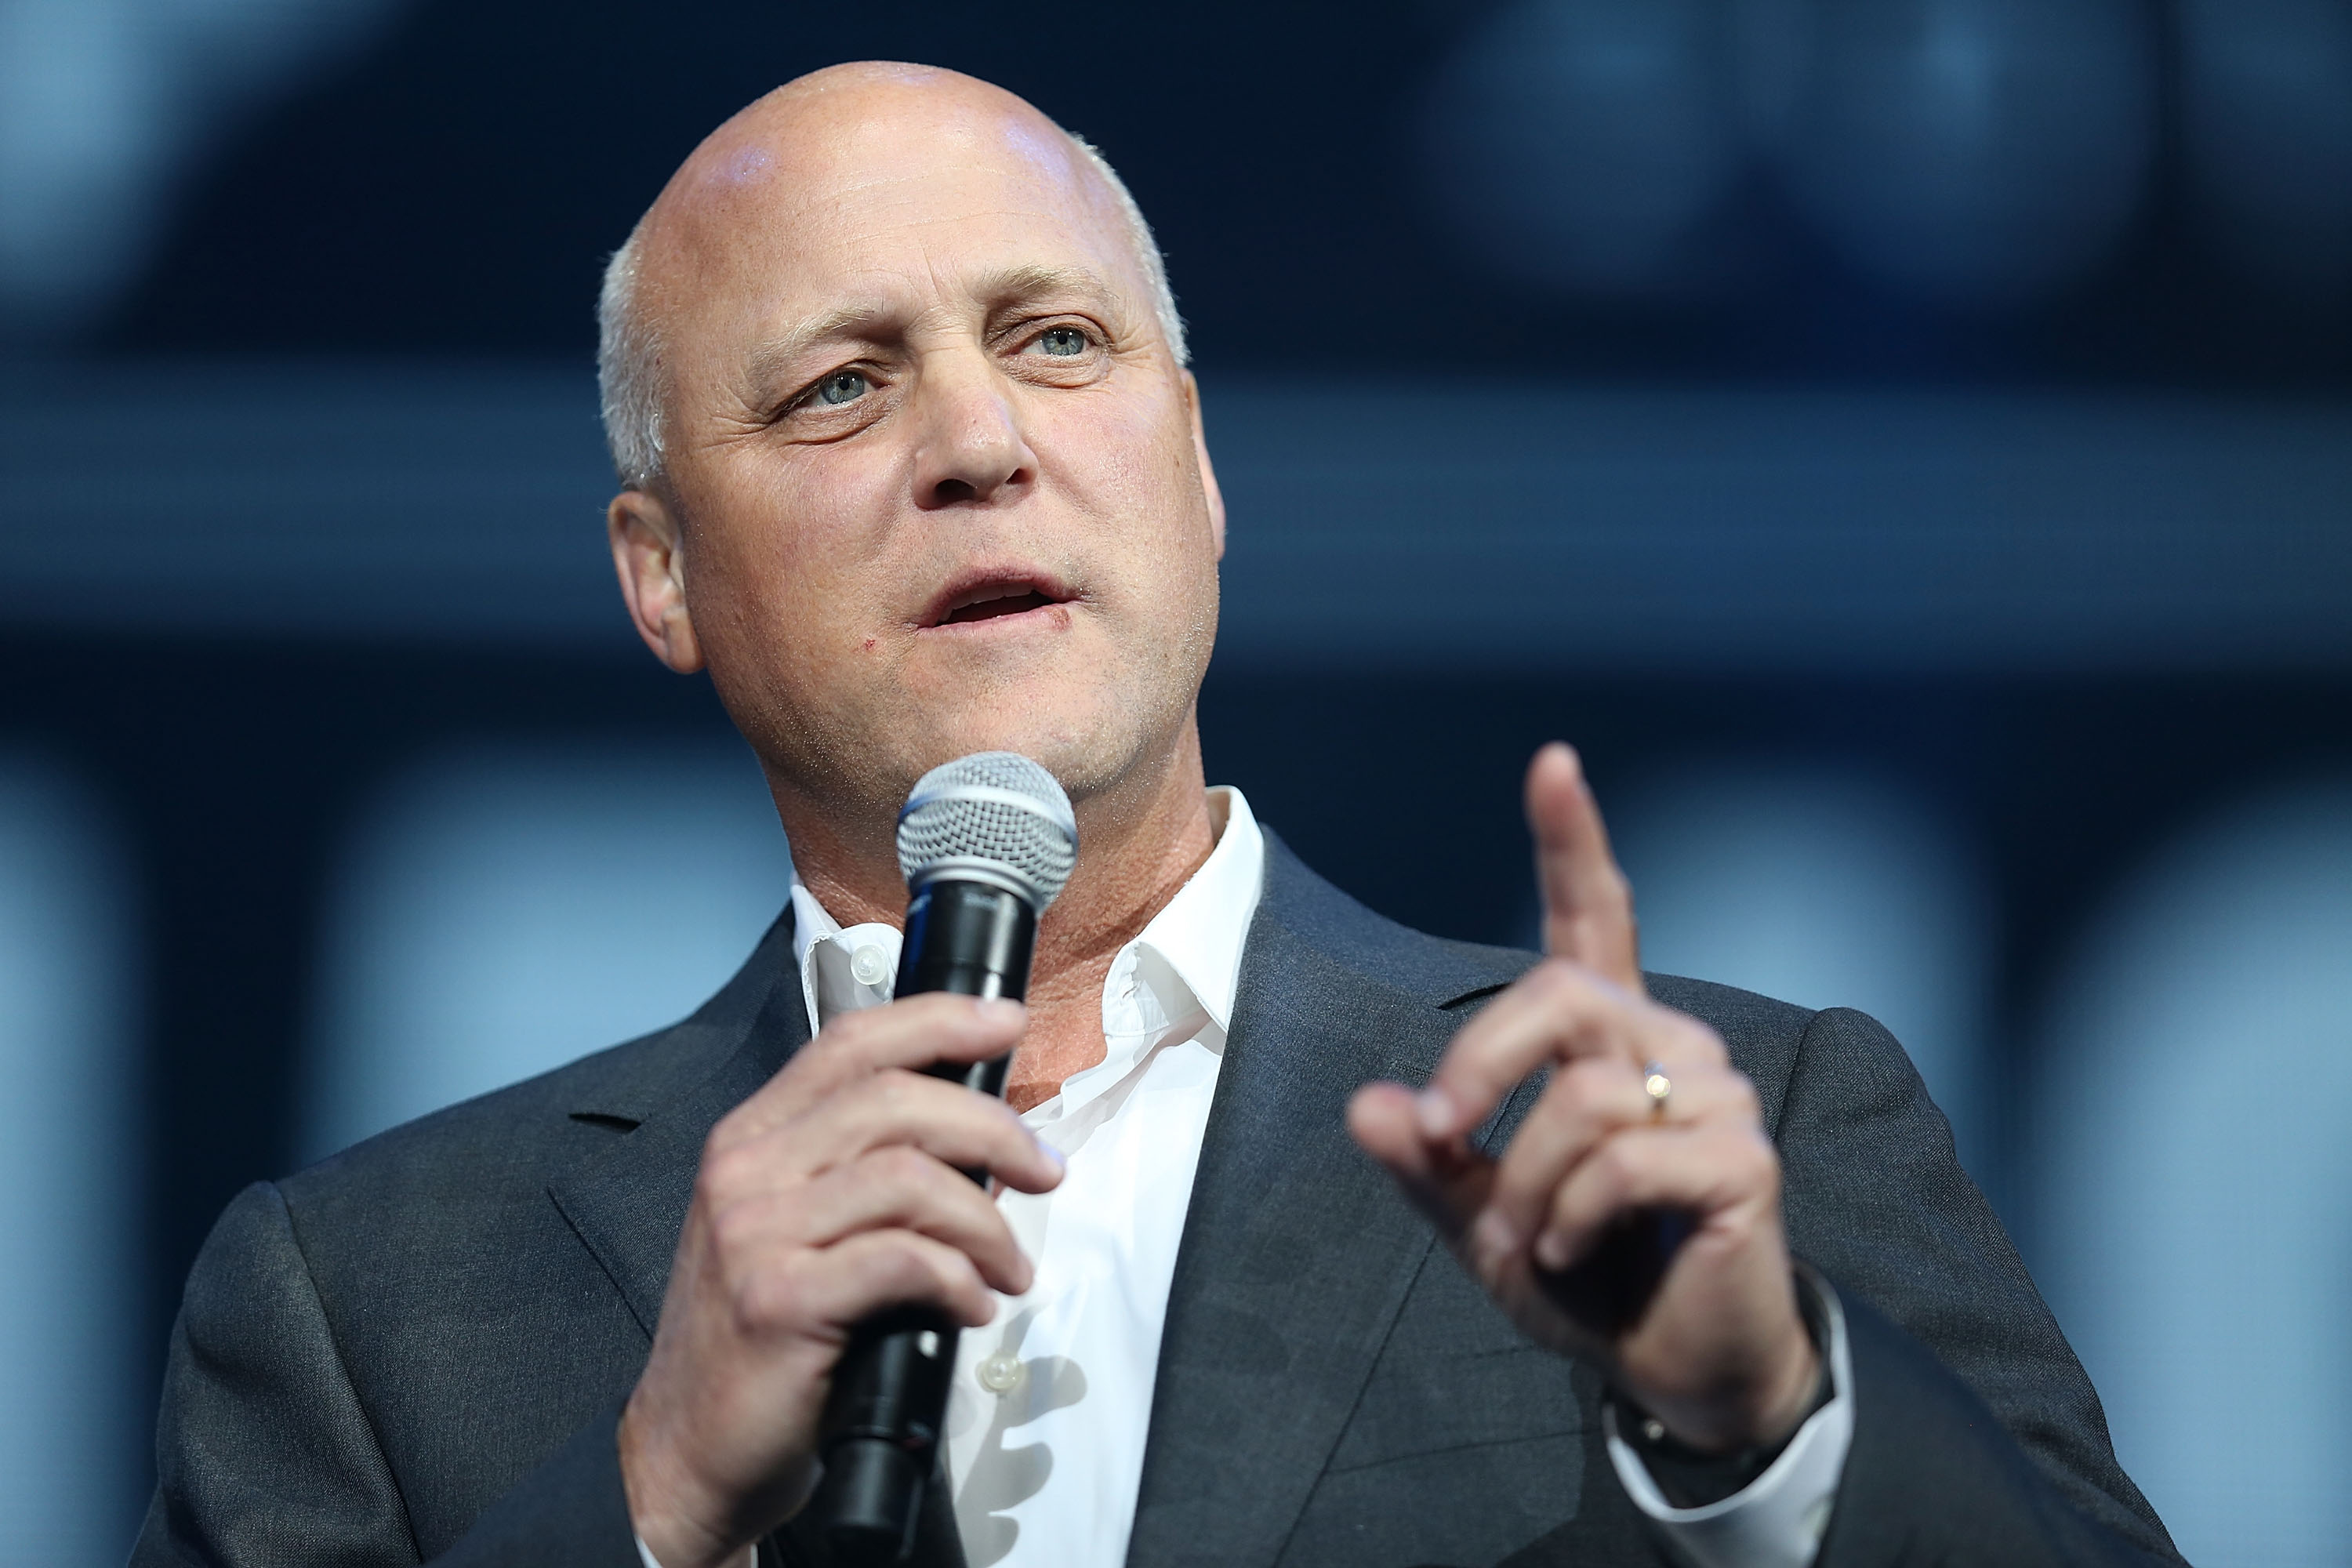 New Orleans Mayor Mitch Landrieu speaks during a Hurricane Katrina 10th anniversary event. (Joe Raedle—Getty Images)